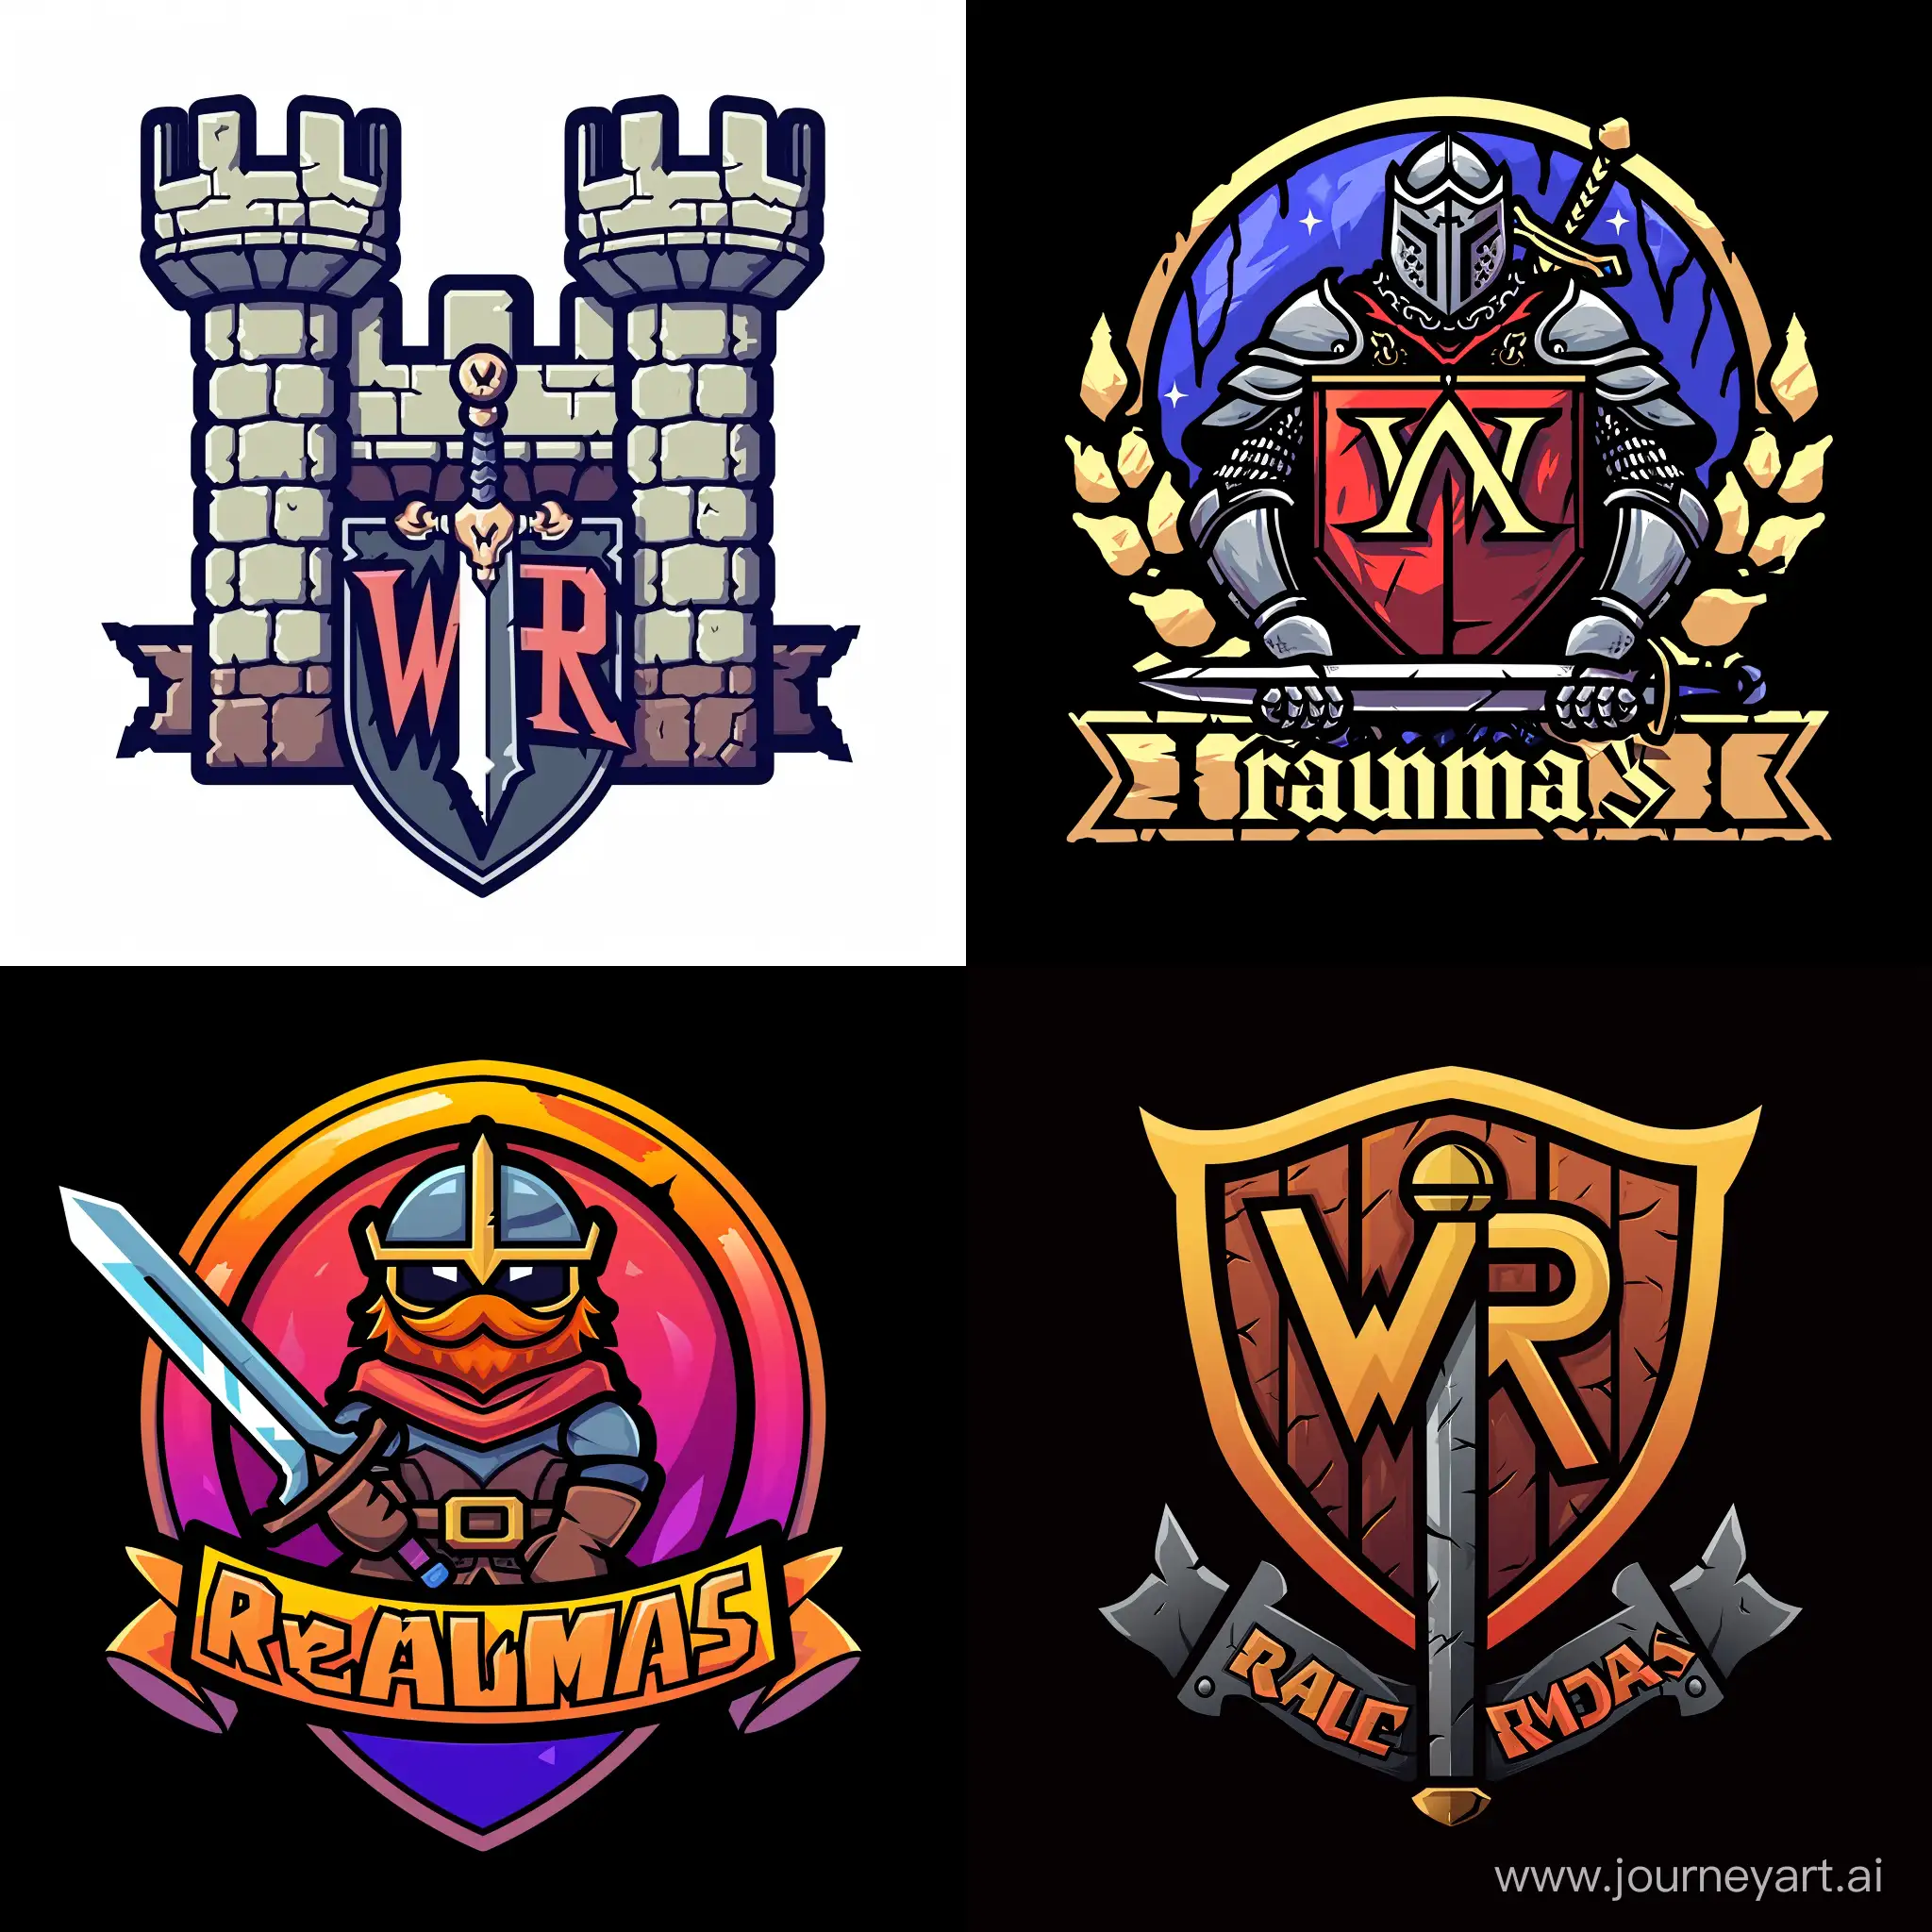 W R  logo Rpg 2D shade pixel Realm
as a rotmg private server